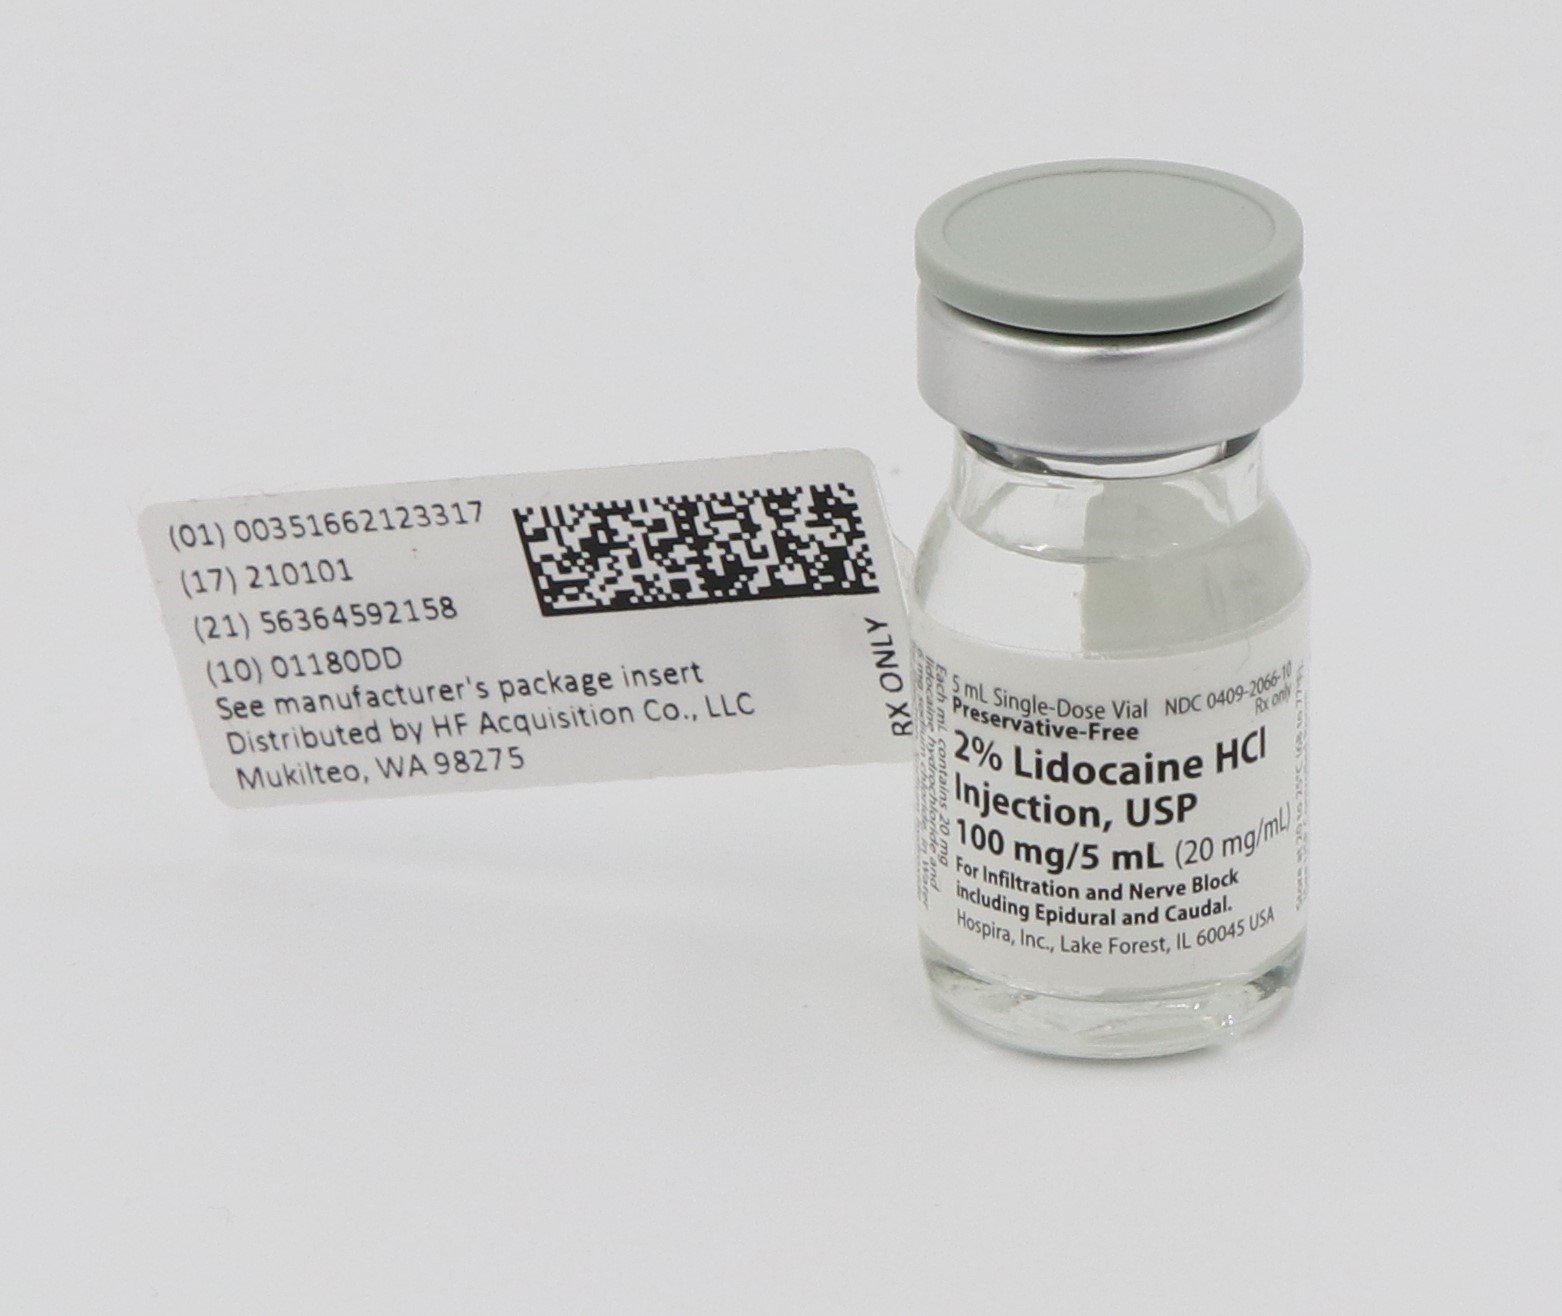 Is Lidocaine Hci 20 Mg In 1 Ml safe while breastfeeding